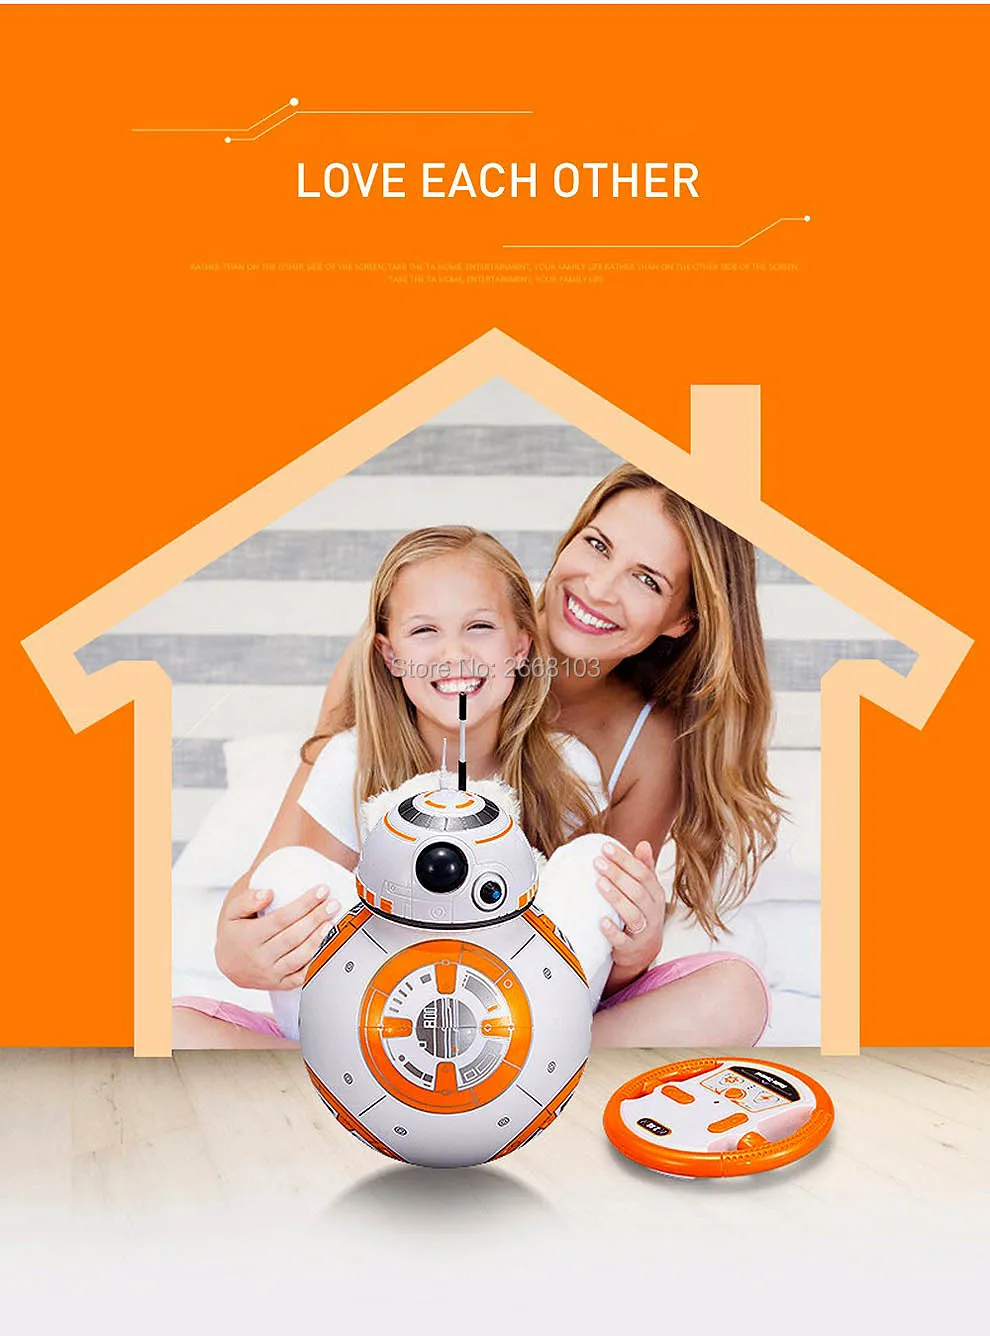 Upgrade Version BB-8 Ball 20.5cm RC Droid Robot 2.4G Remote Control BB8 Intelligent With Sound Robot Toys For Gifts Model Action rc auto